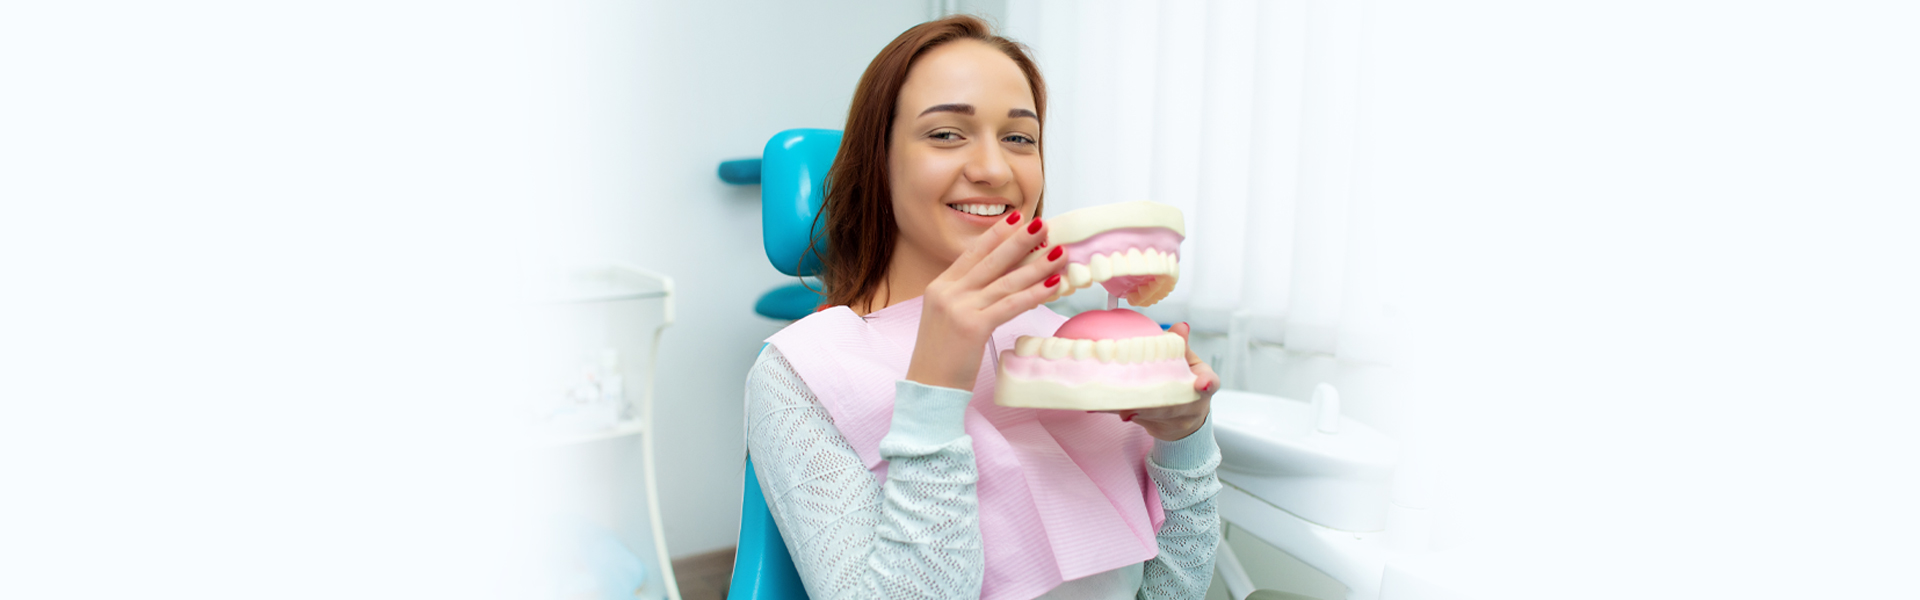 Dental Veneers Vs. Dental Crowns: Which Is Right for You?